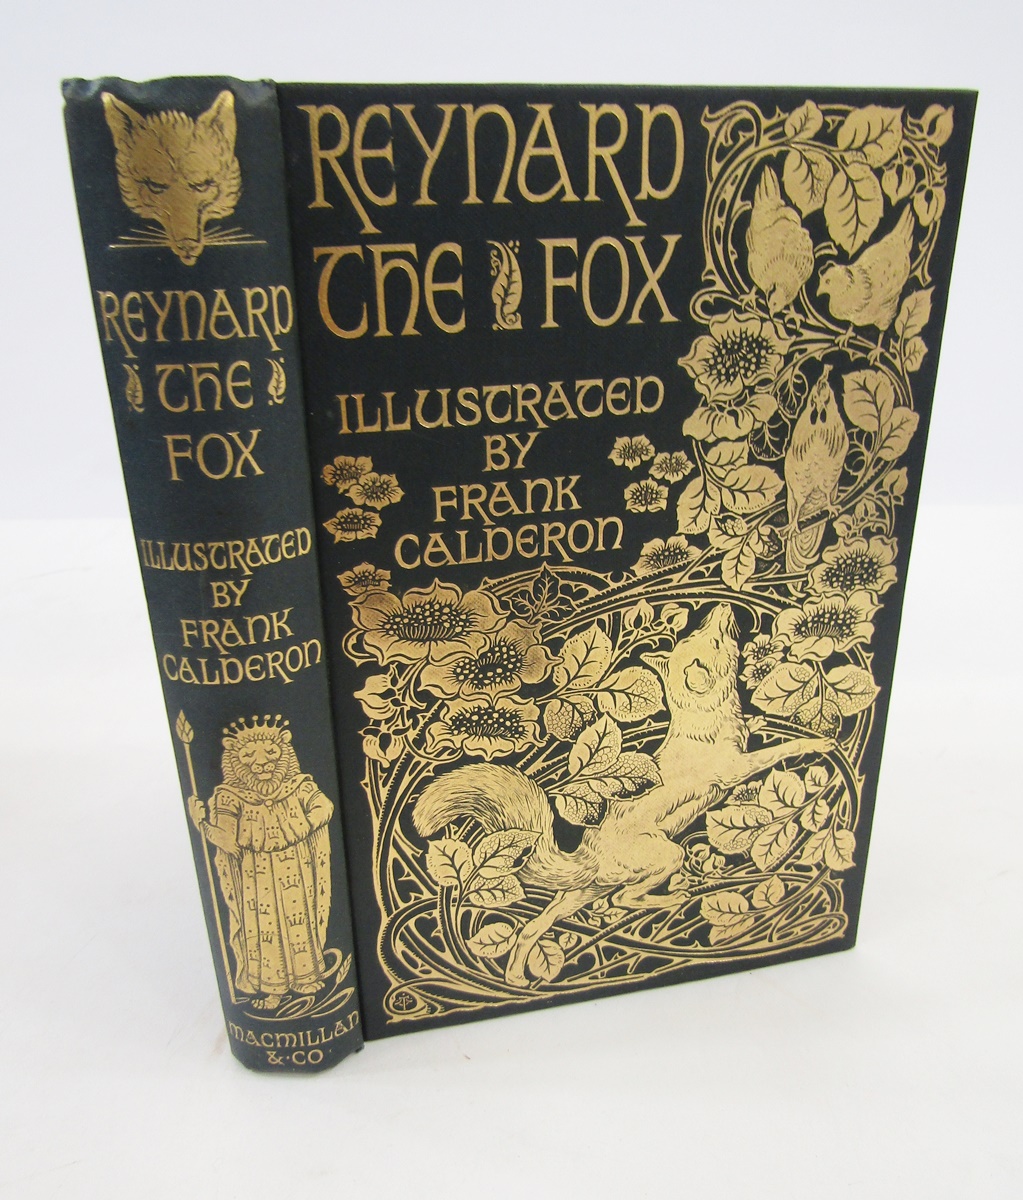 Pictorial boards and bindings - Jacobs, Joseph ( ed.) "Reynard the Fox" ills by Frank Calderon, - Image 2 of 24